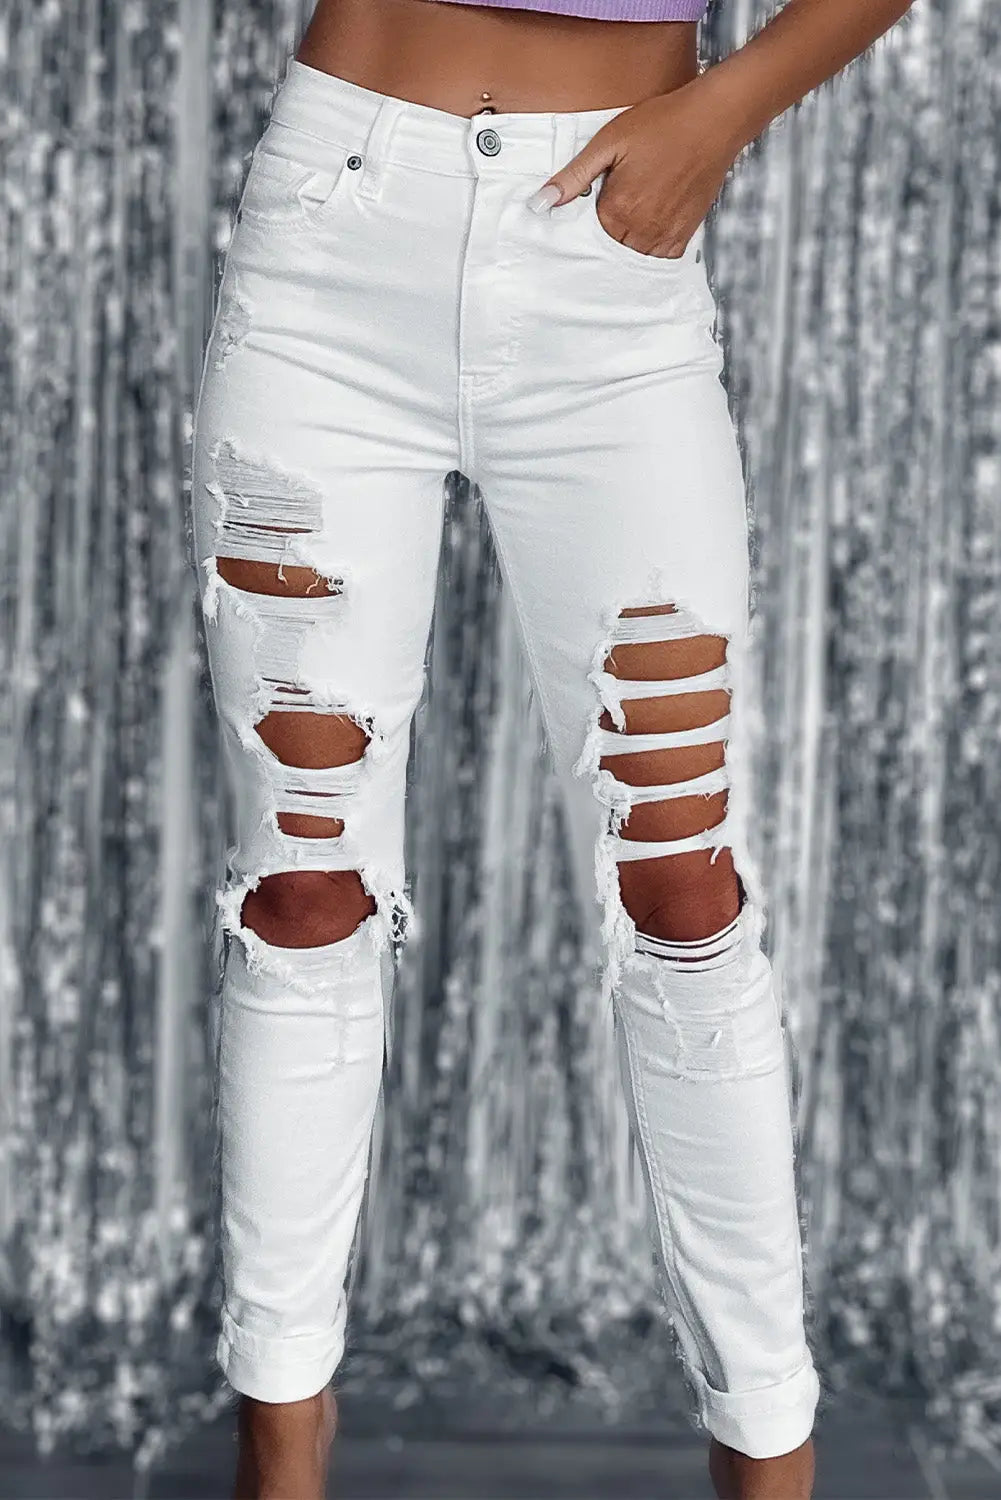 White distressed ripped holes high waist skinny jeans - 6 / 95% cotton + 5% elastane - bottoms